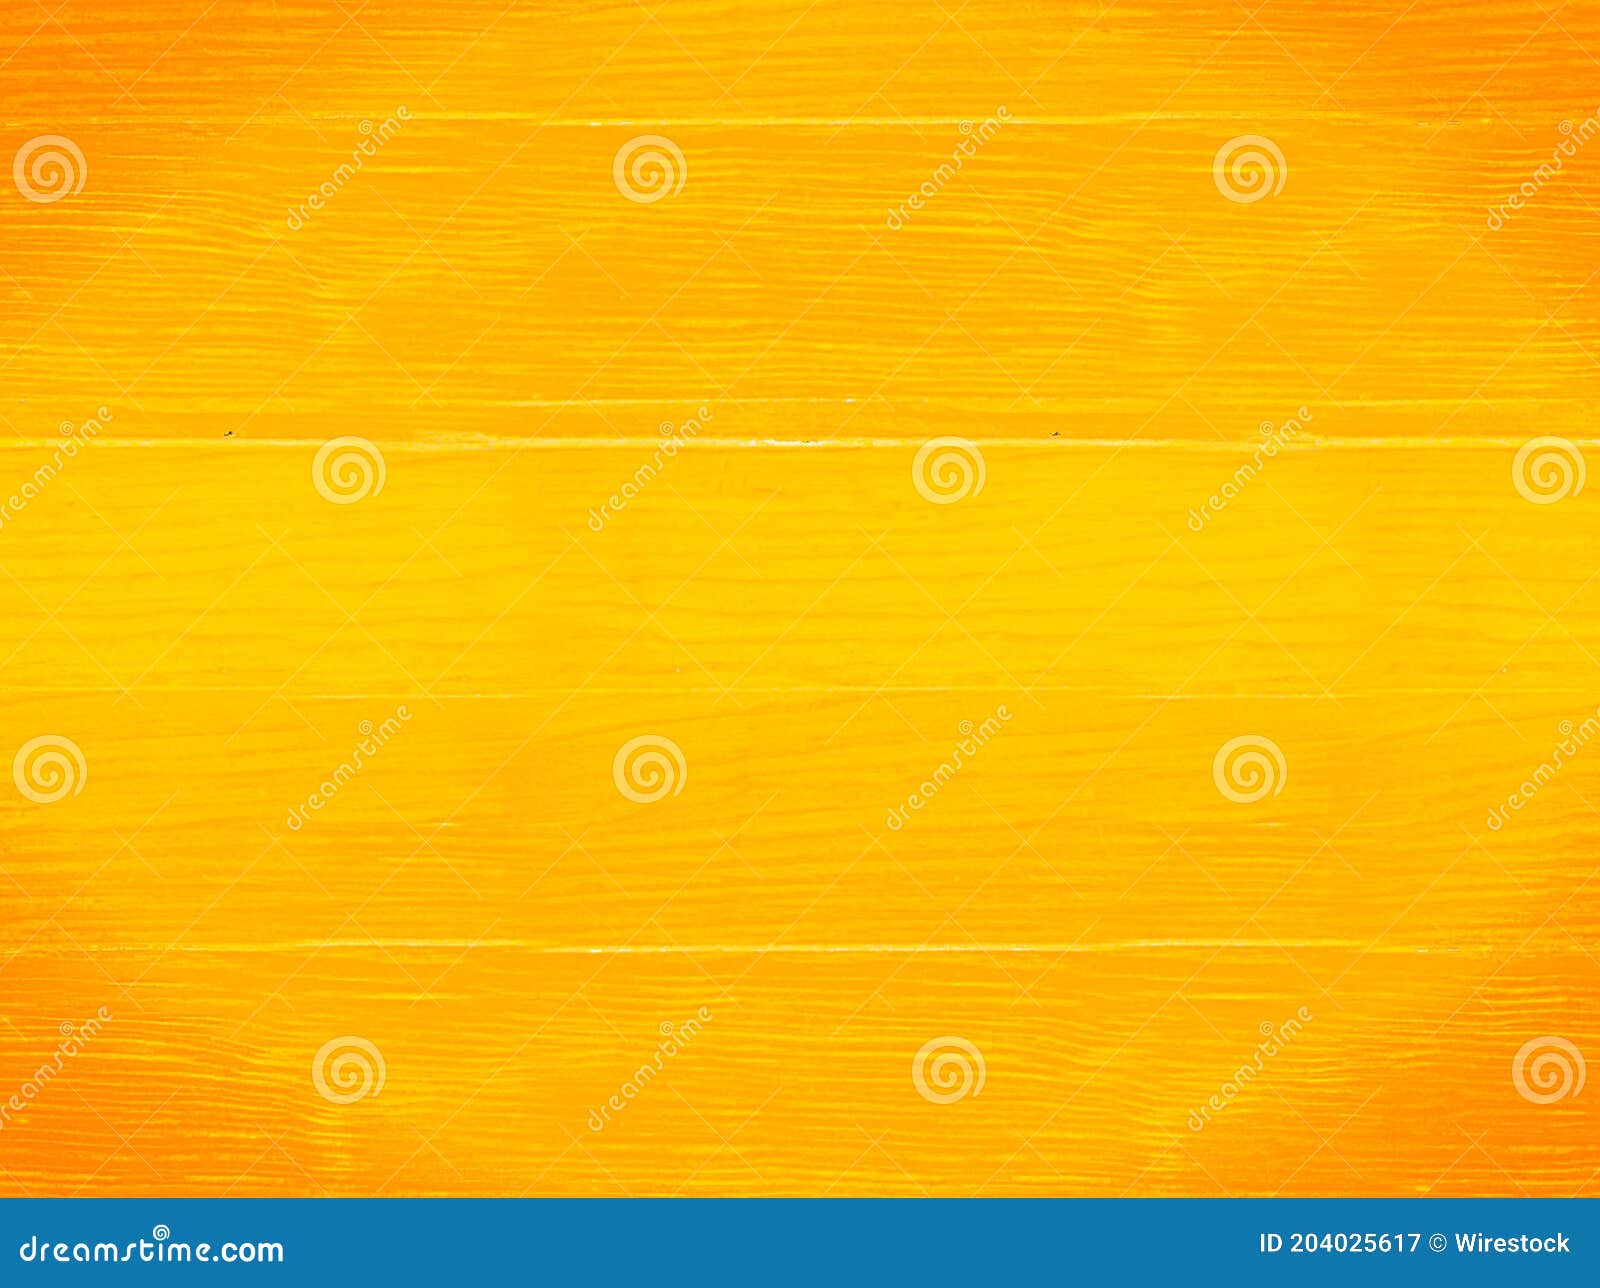 Abstract Yellow Background with Wood Texture Stock Image - Image of ...